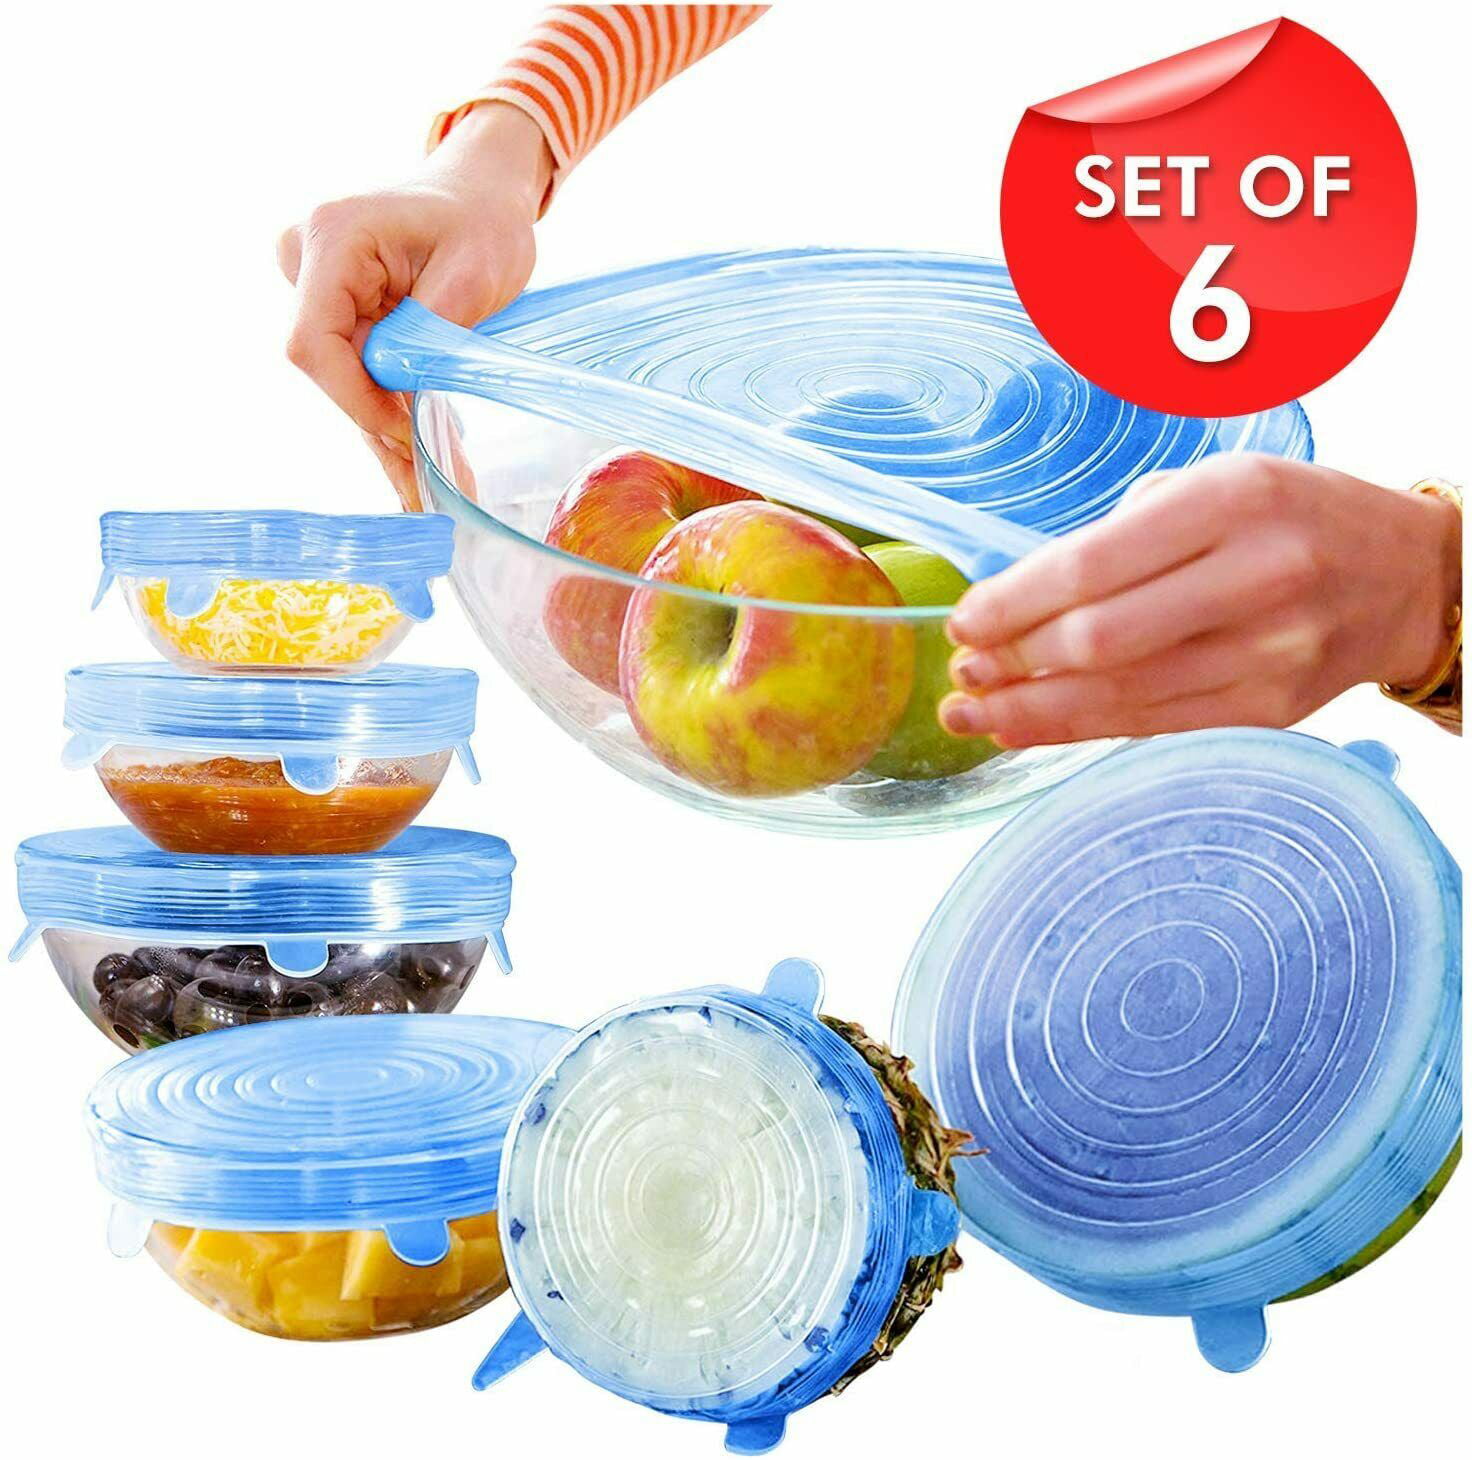 Reusable Silicone Food Bowl Covers Wrap Seal Keep Food Stretch and Fresh 